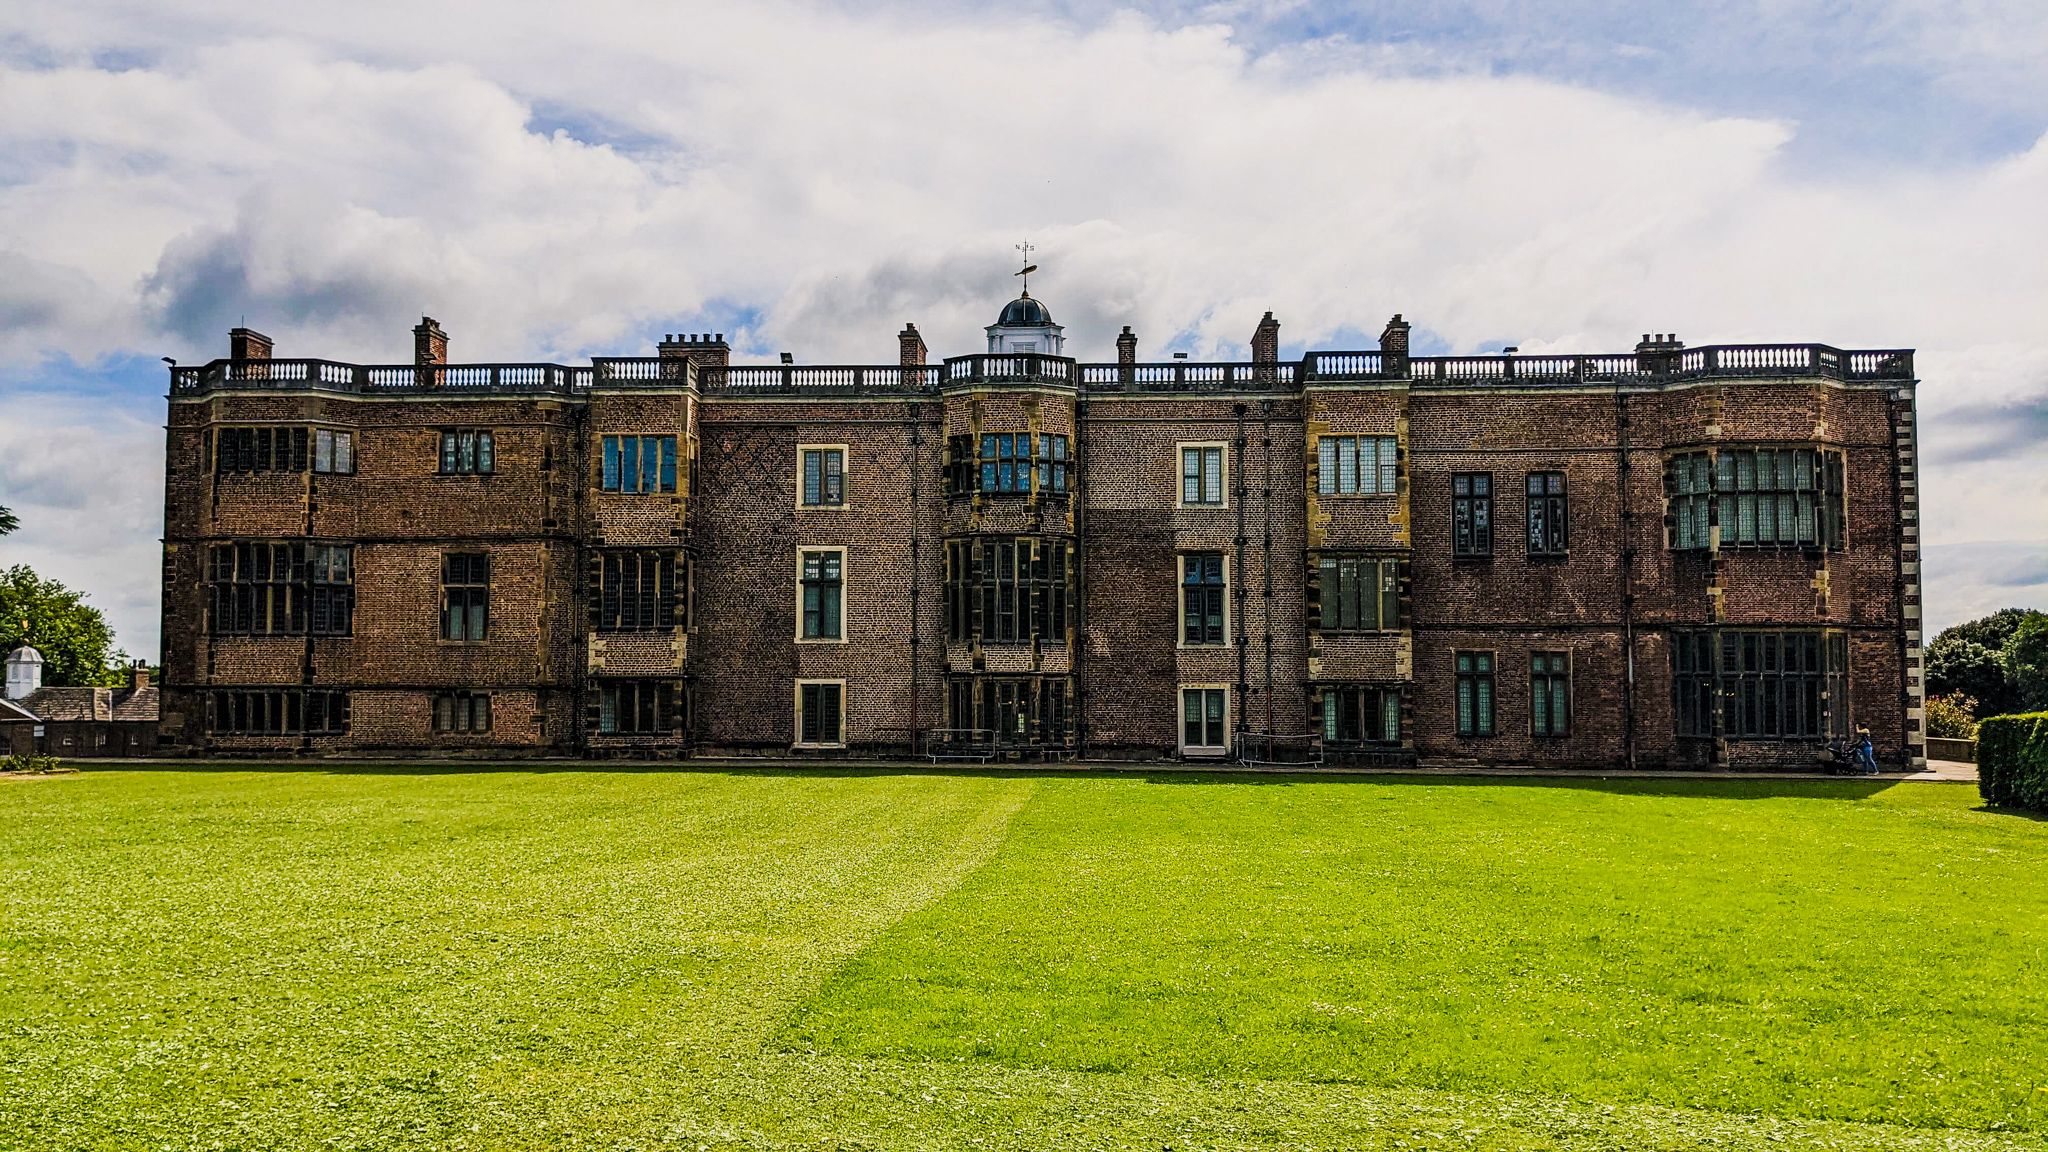 View of Temple Newsam from the west lawn